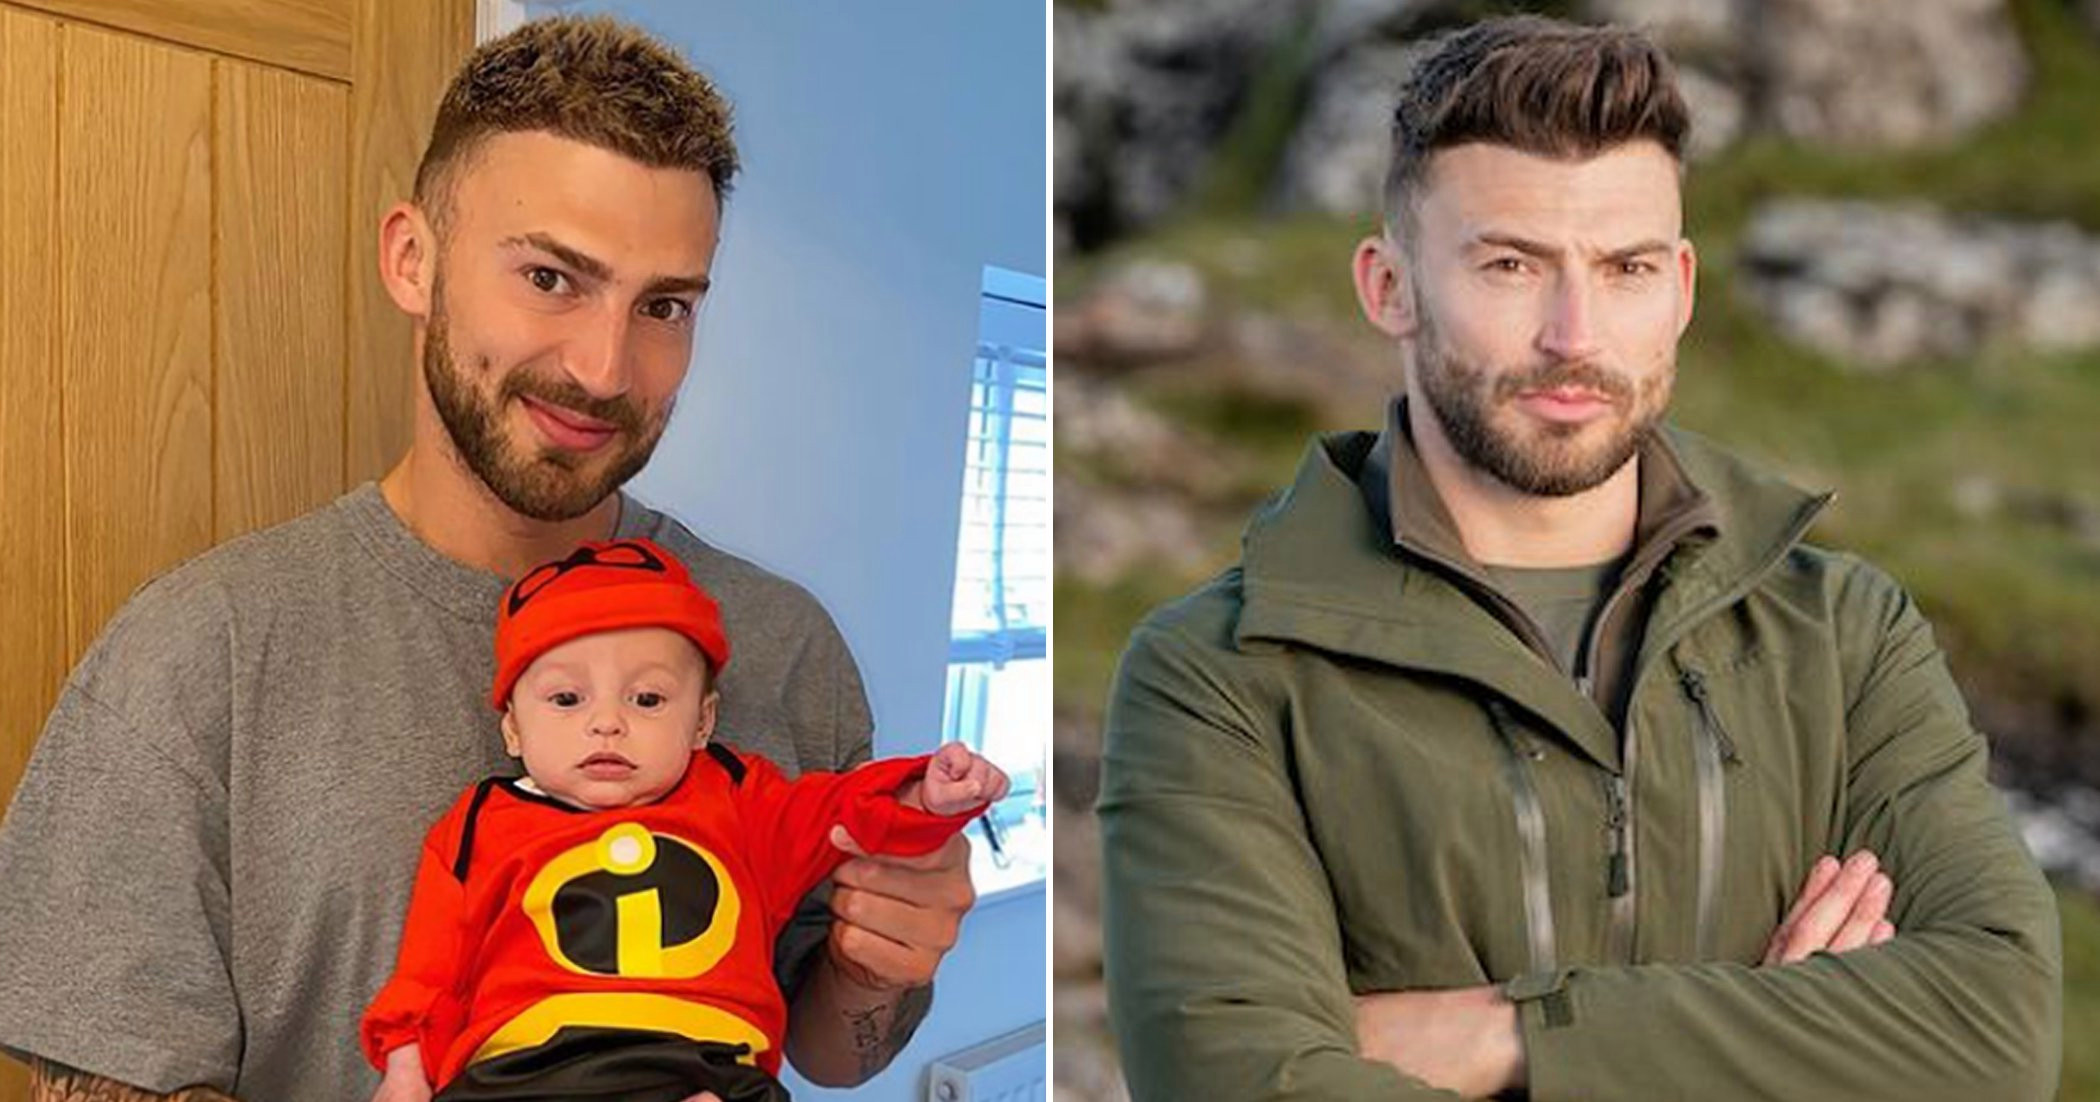 Celebrity SAS: Jake Quickenden feared not being able to hold baby son after suffering ‘worst injury’ on show